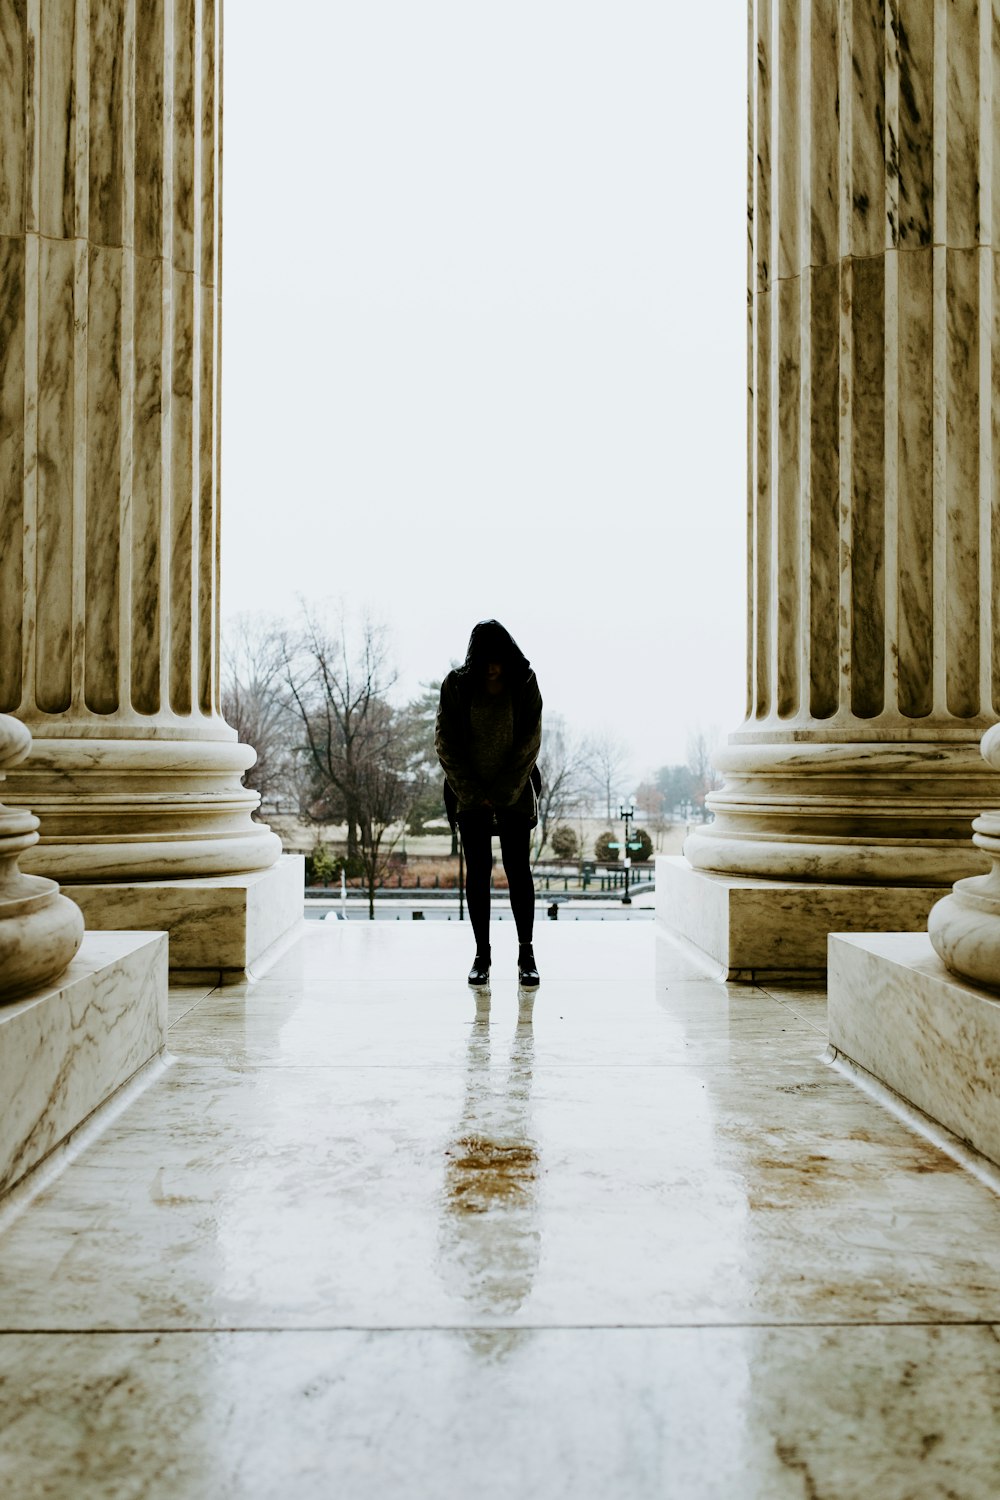 a person standing in front of some pillars